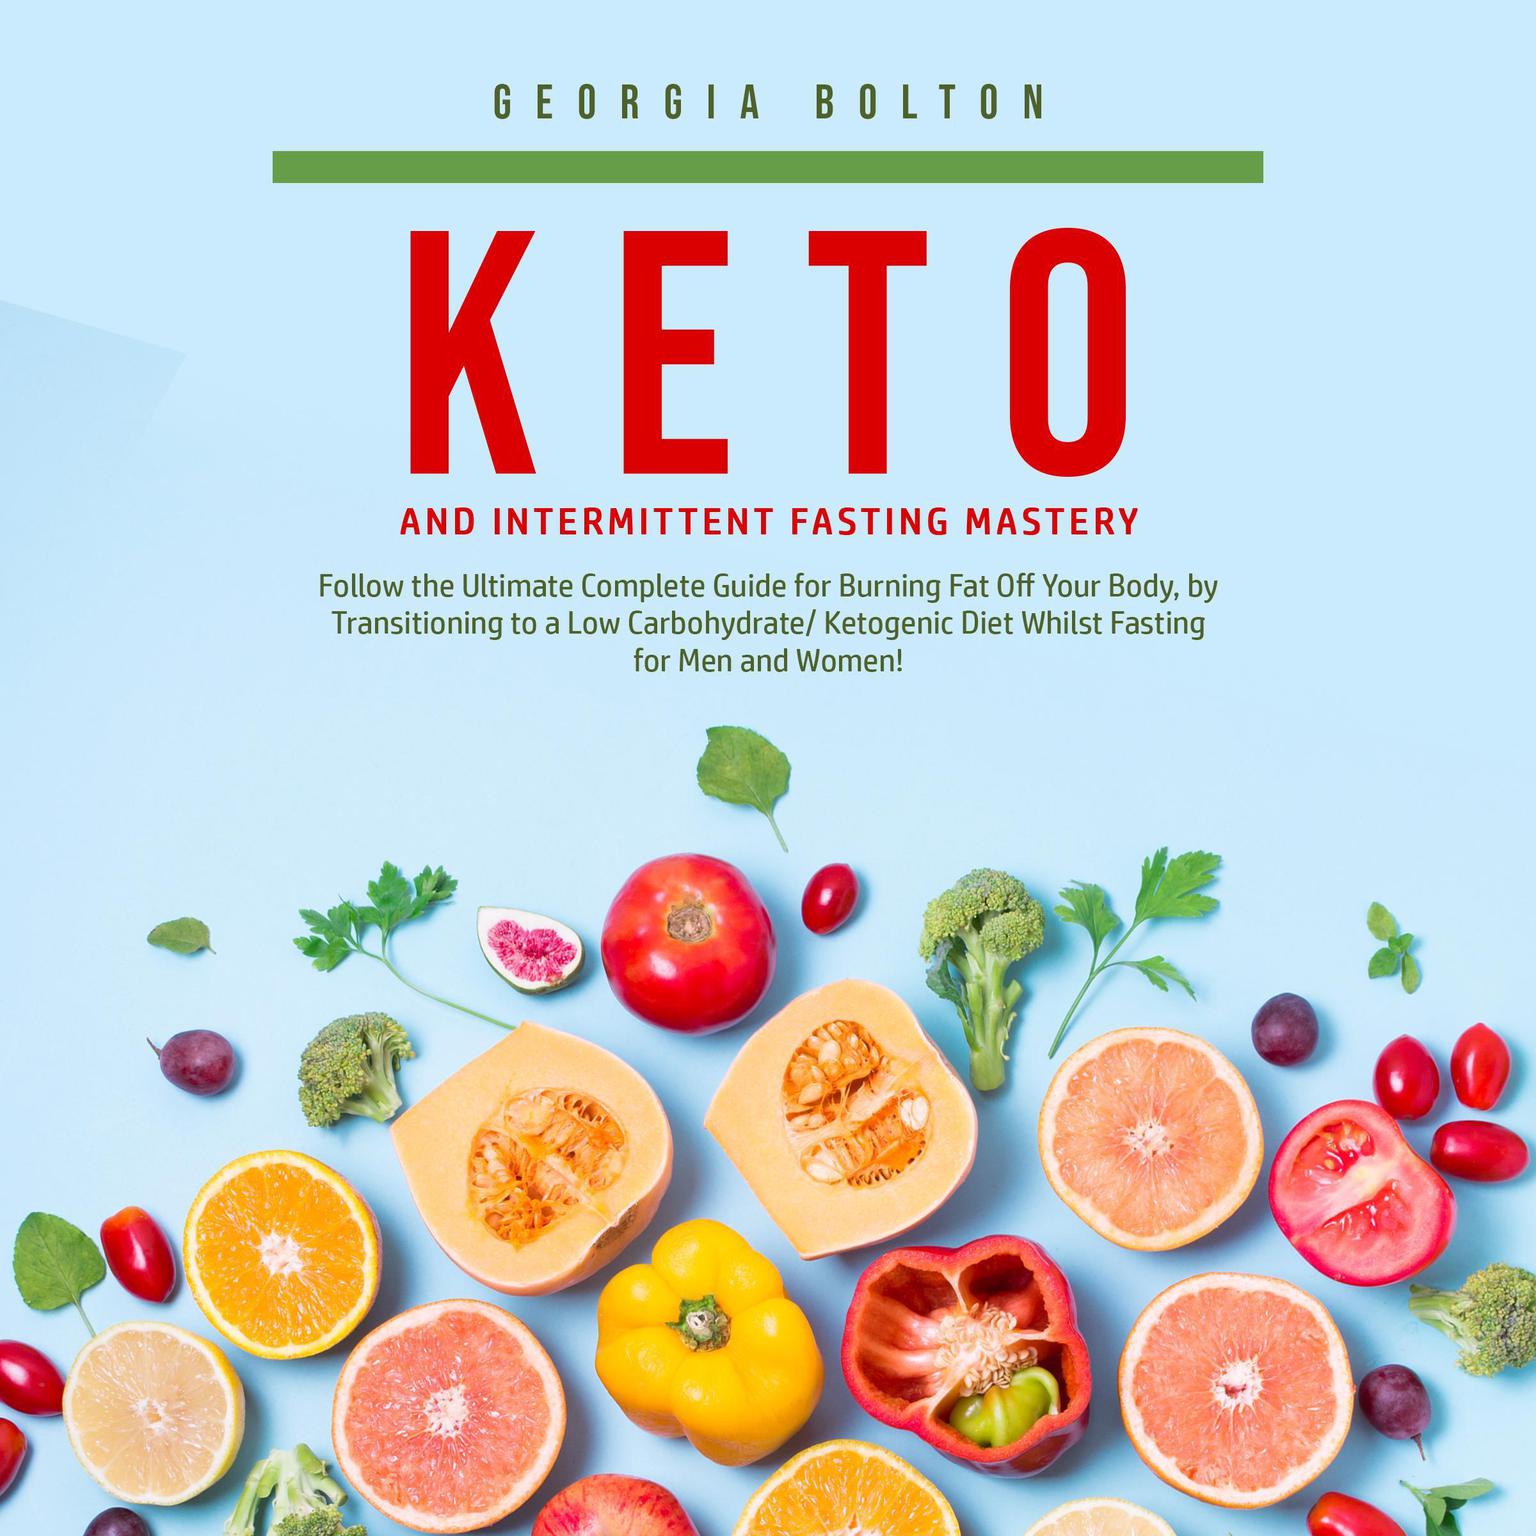 Keto and Intermittent Fasting Mastery: Follow the Ultimate Complete Guide for Burning Fat Off Your Body, by Transitioning to a Low Carbohydrate/ Ketogenic Diet Whilst Fasting for Men and Women! Audiobook, by Georgia Bolton